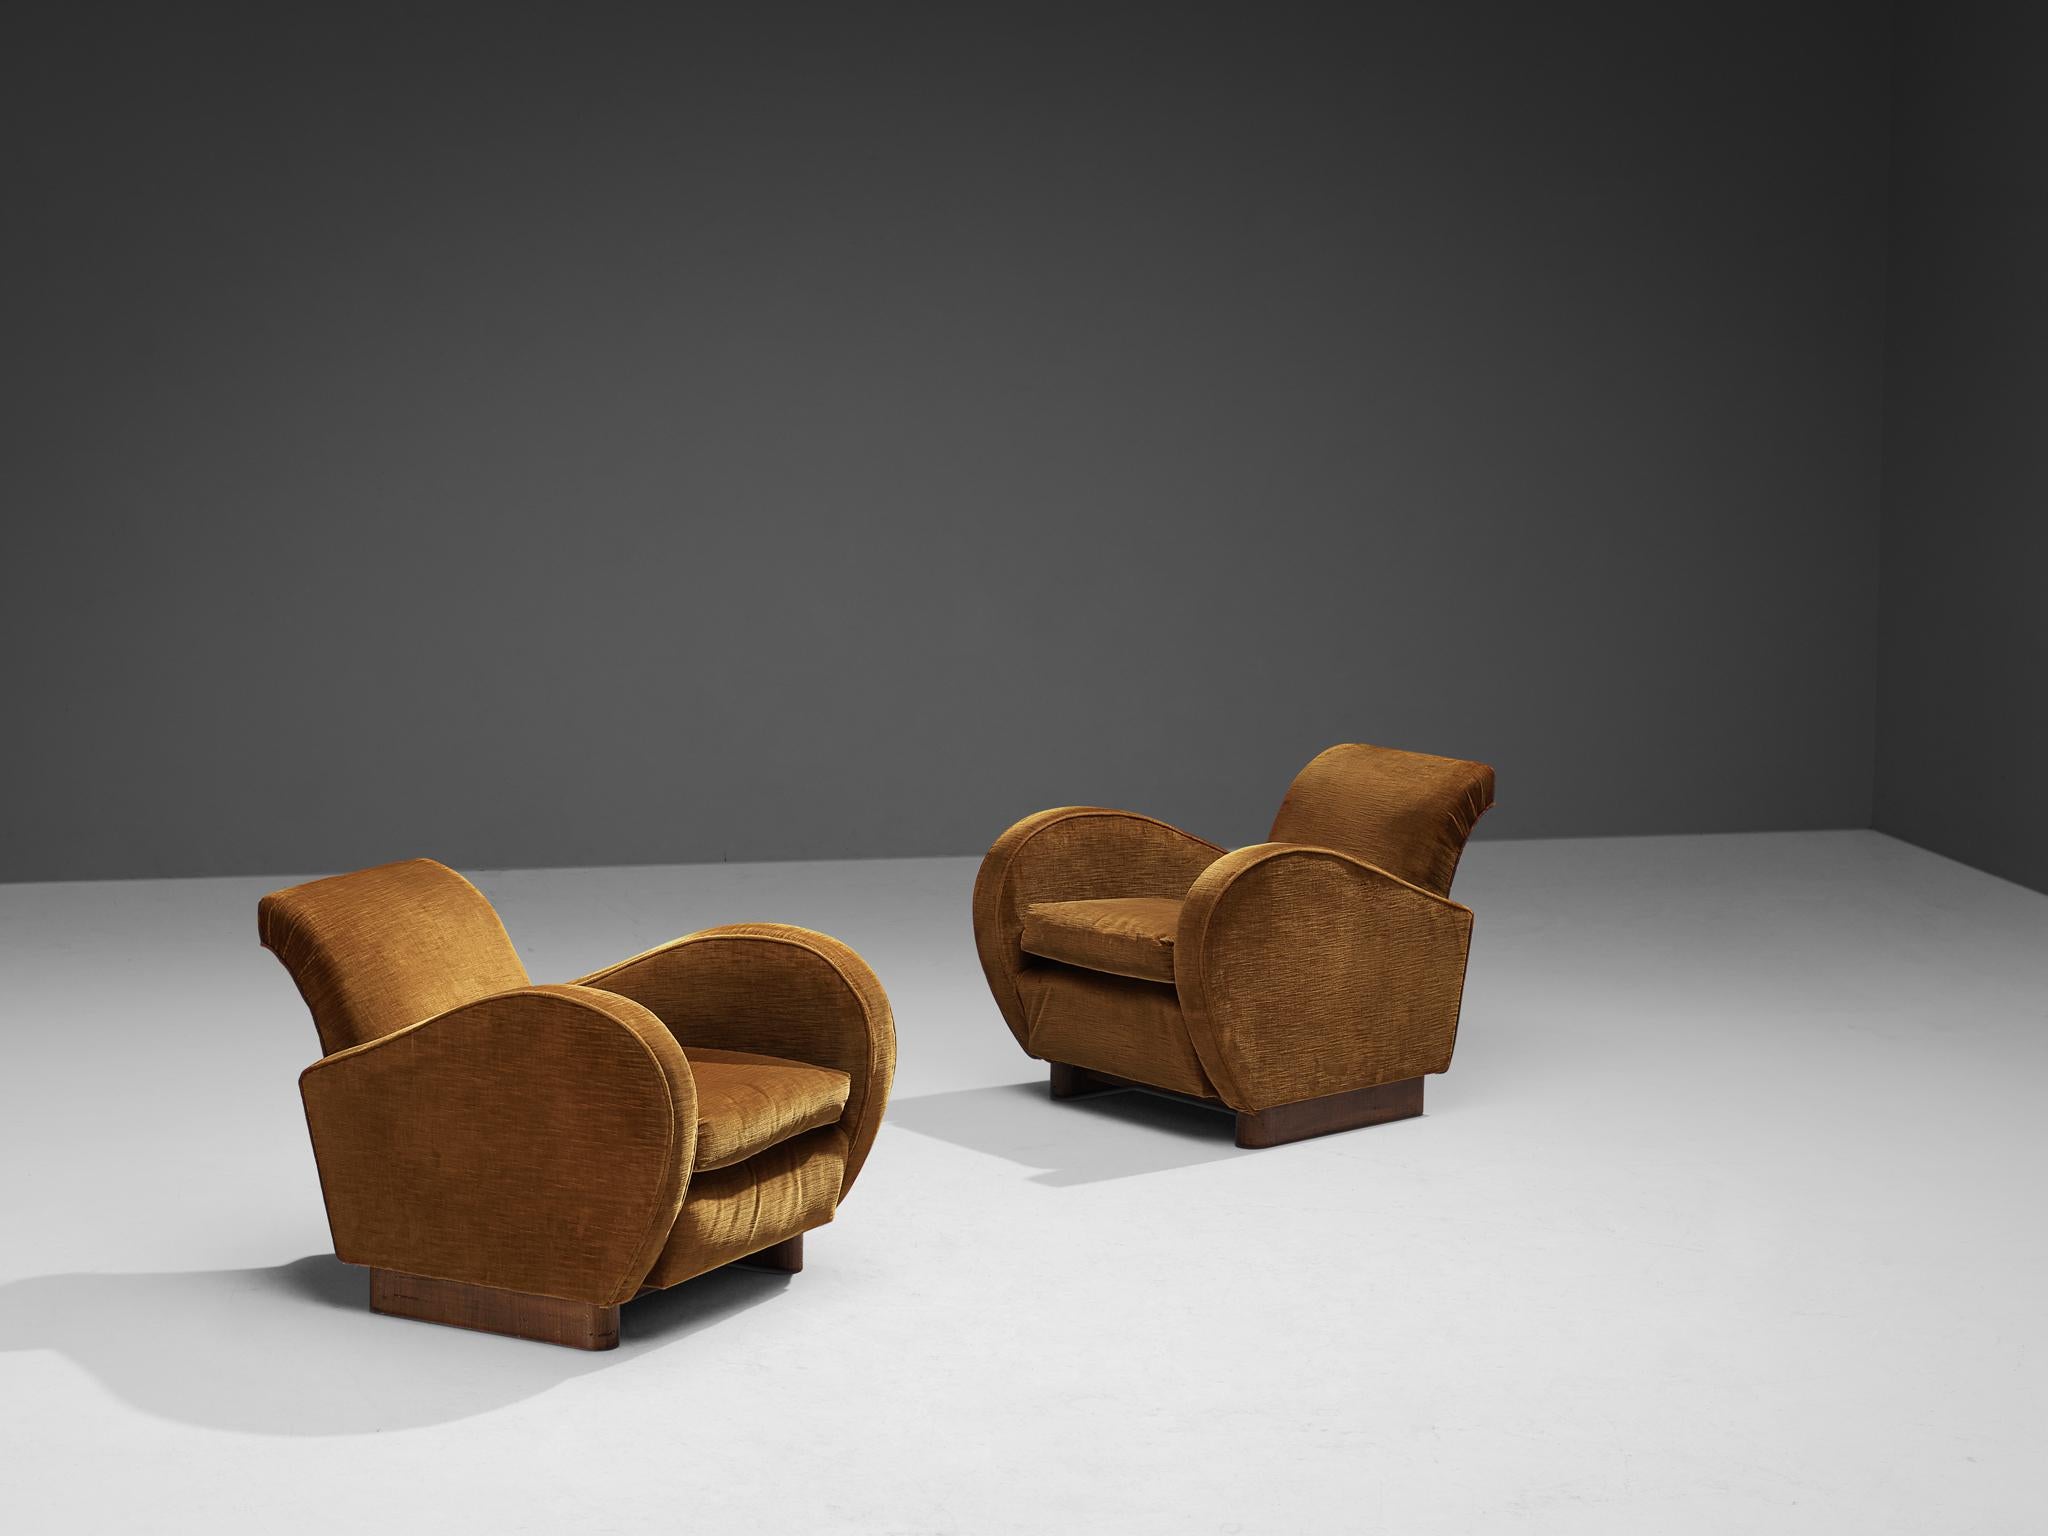 Pair of lounge chairs, velvet, wood, Italy, 1940s

These exquisite pair of lounge chairs of Italian origin undoubtedly breathes the Art Deco Period of the 1940s. With its imposing shapes, this design deserves a prominent place in one's interior.